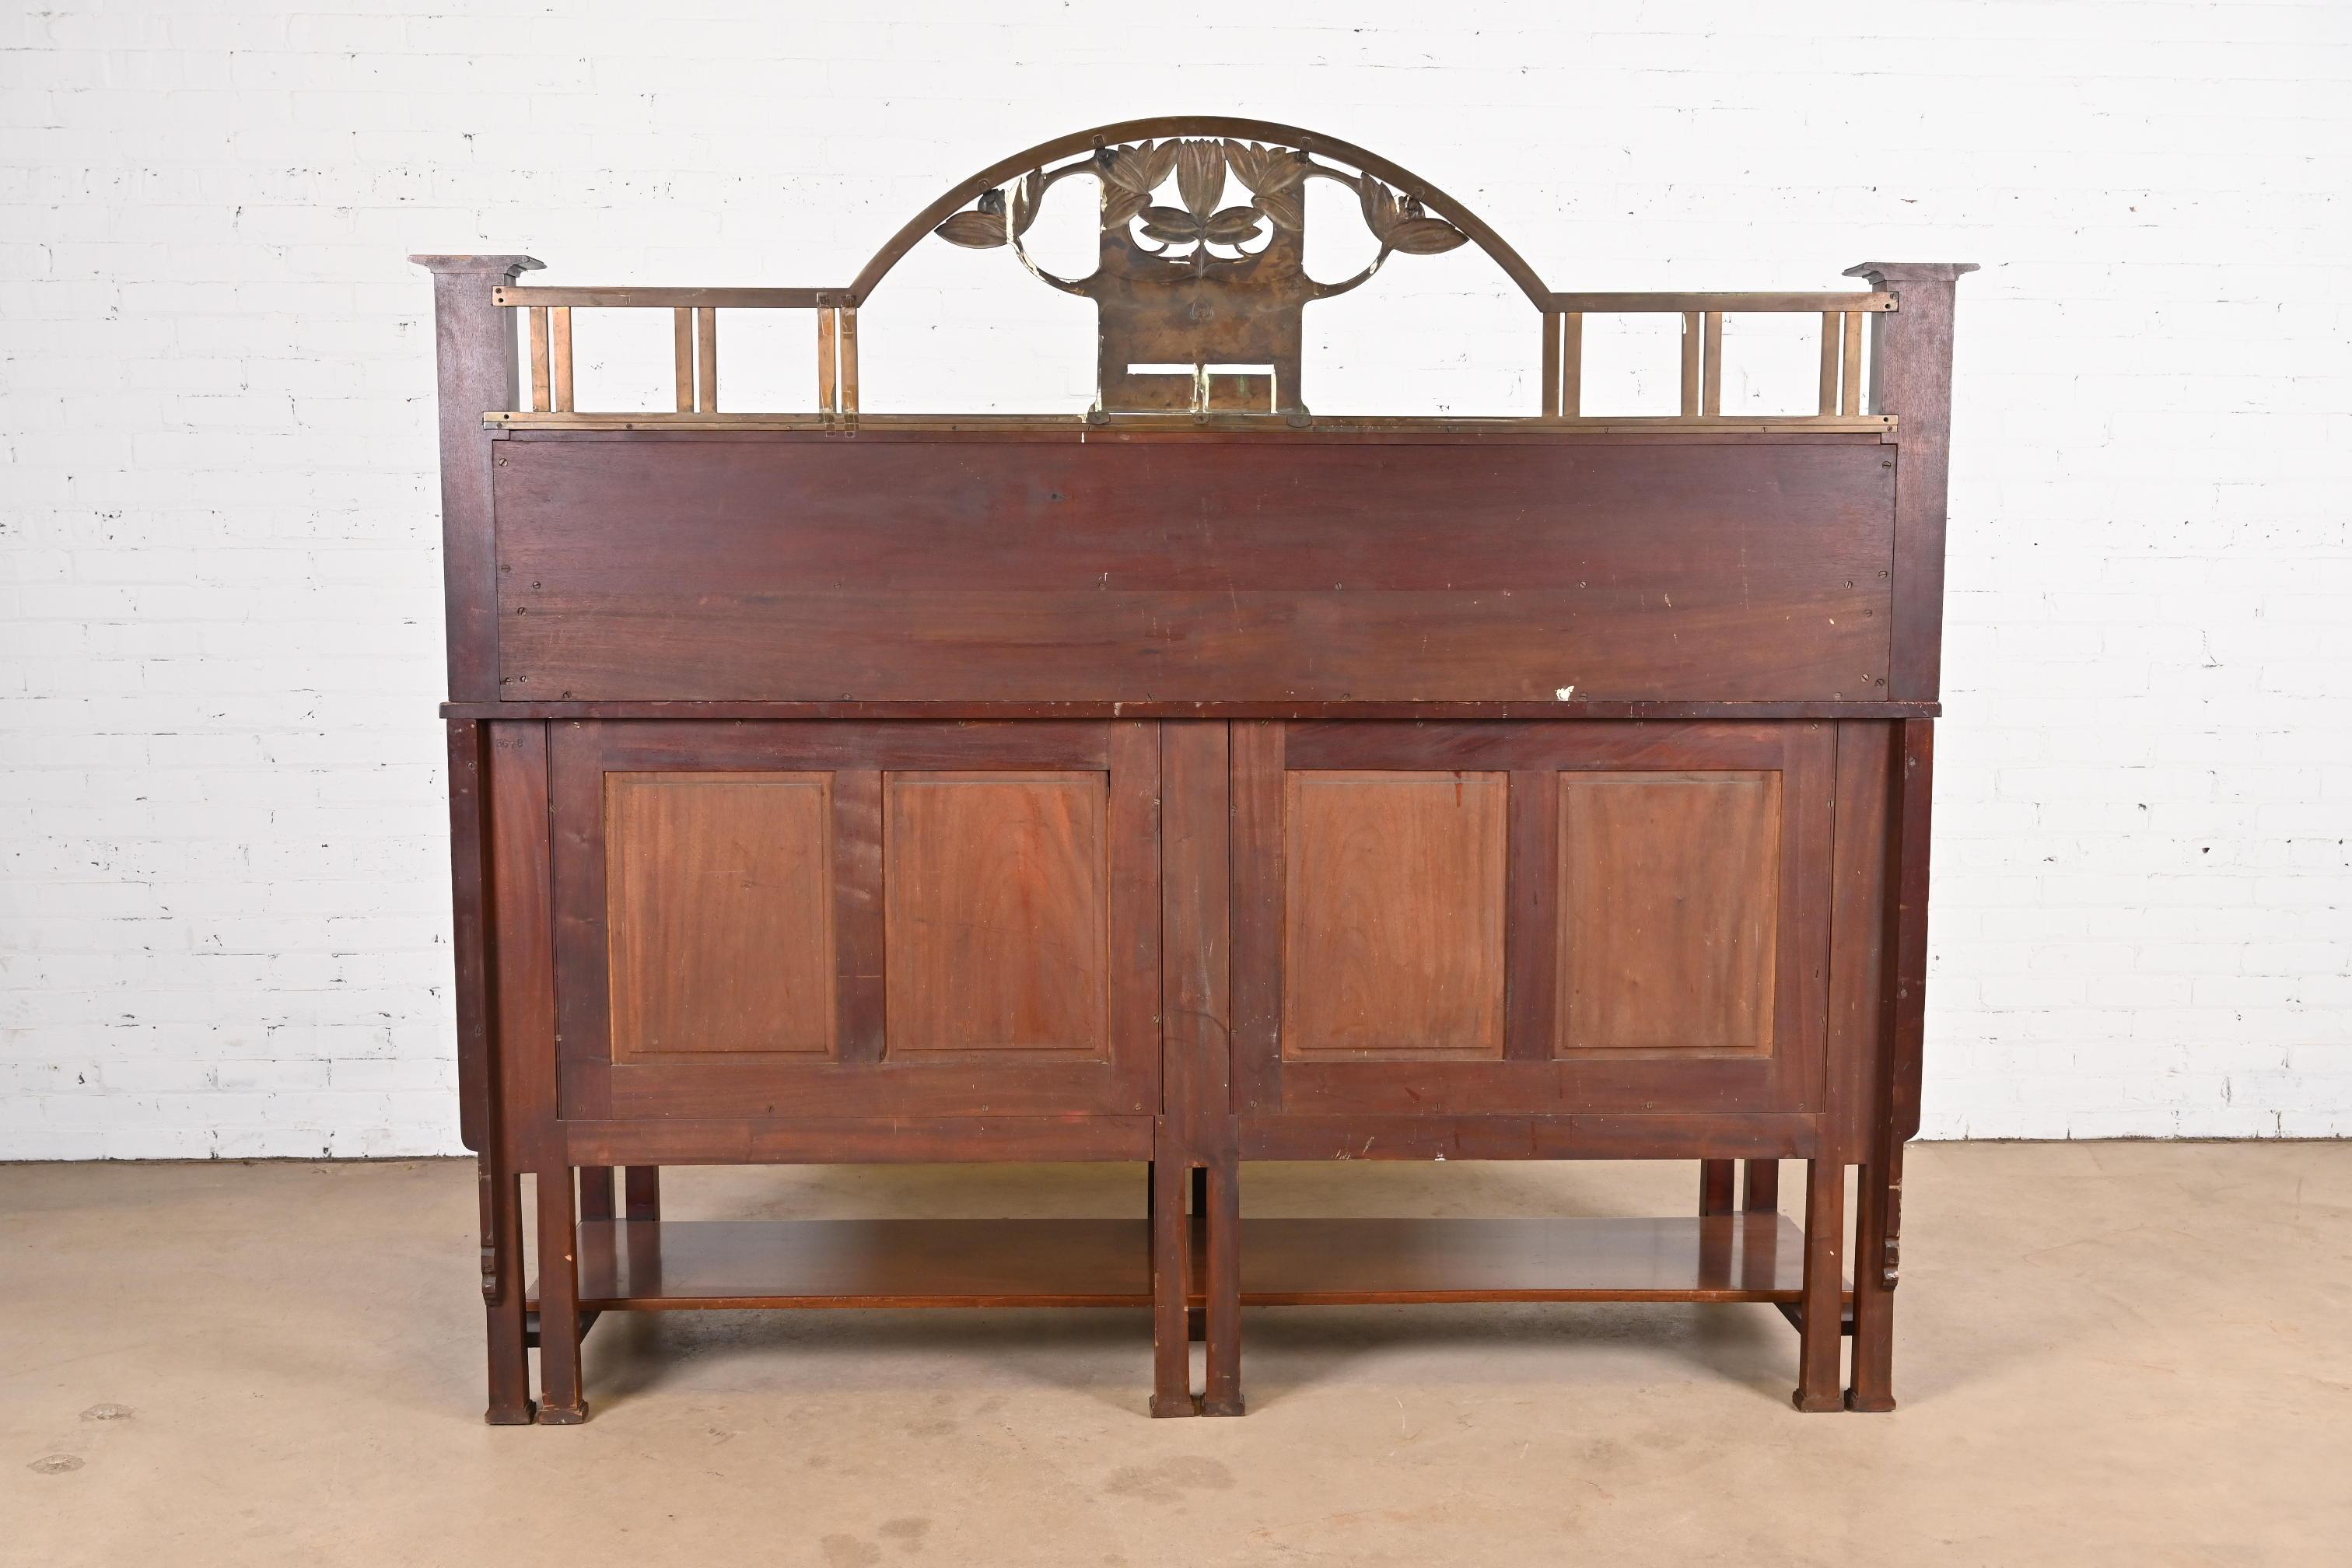 Antique English Arts & Crafts Inlaid Mahogany Sideboard by Robson & Sons For Sale 9